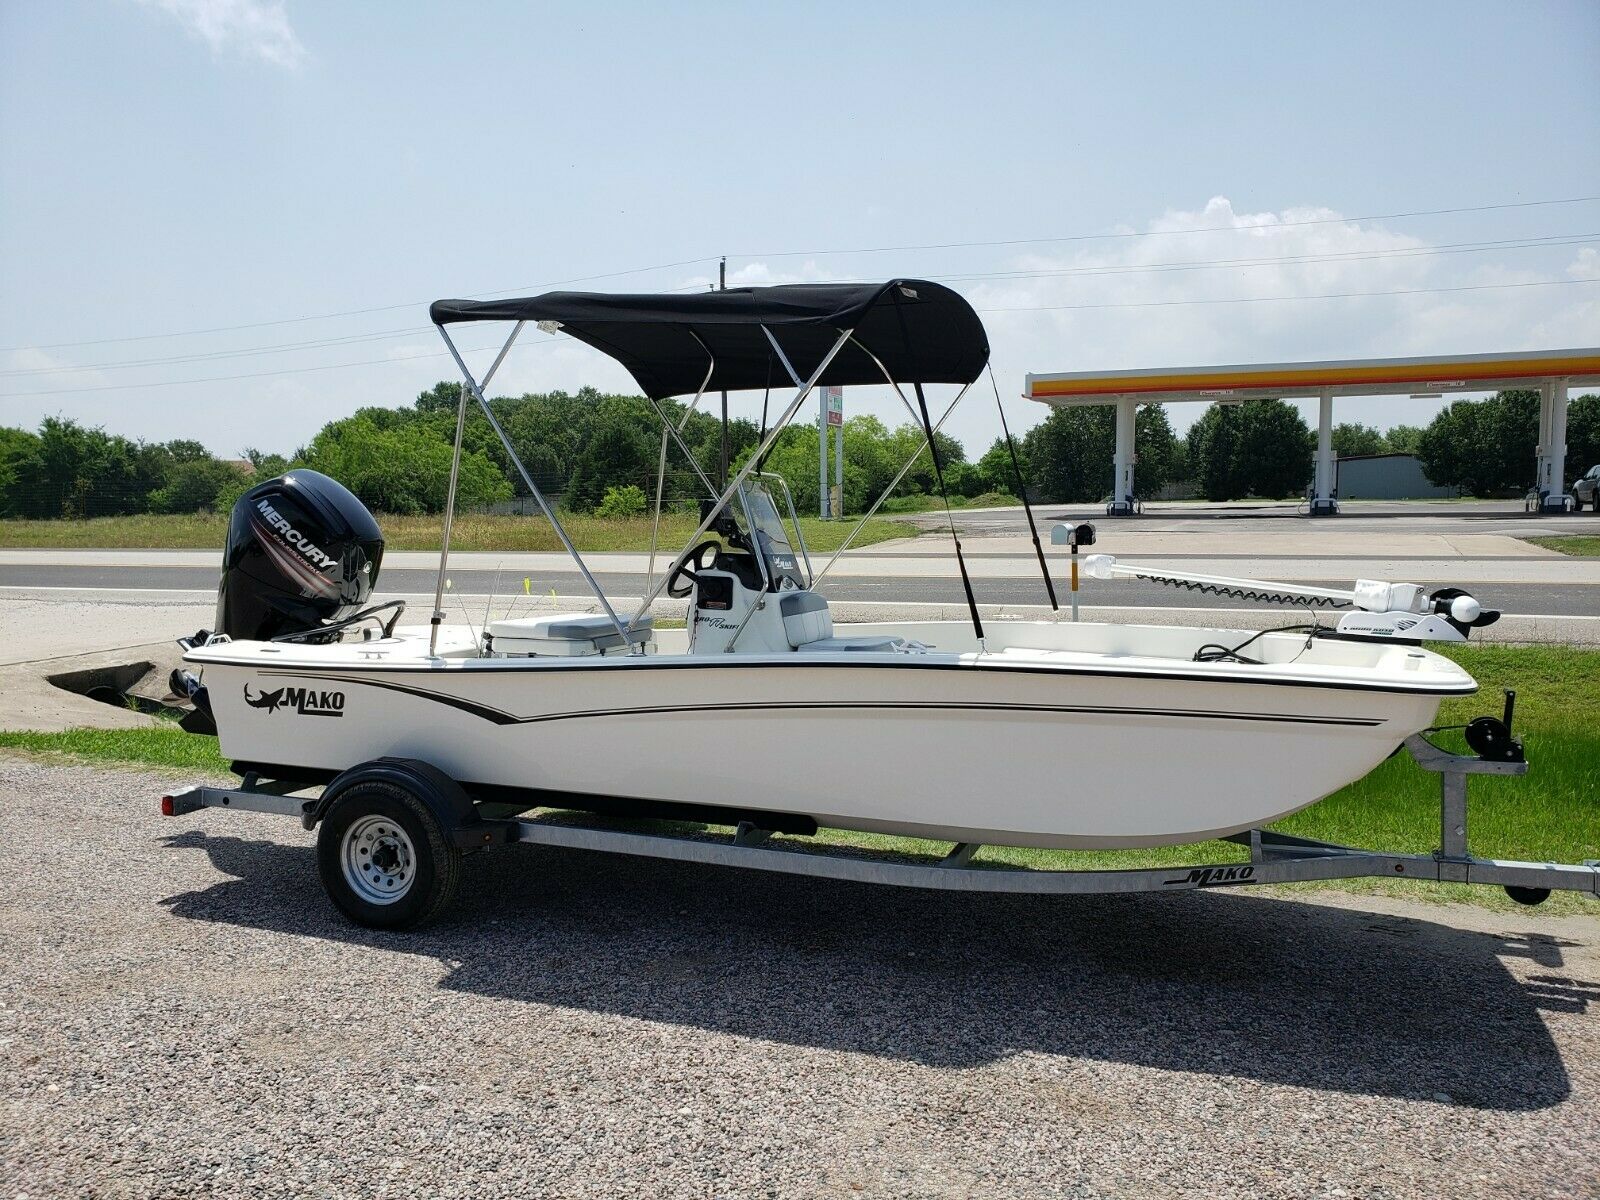 Mako Pro Skiff 17 2019 For Sale For 18 000 Boats From Free Nude Porn Photos 